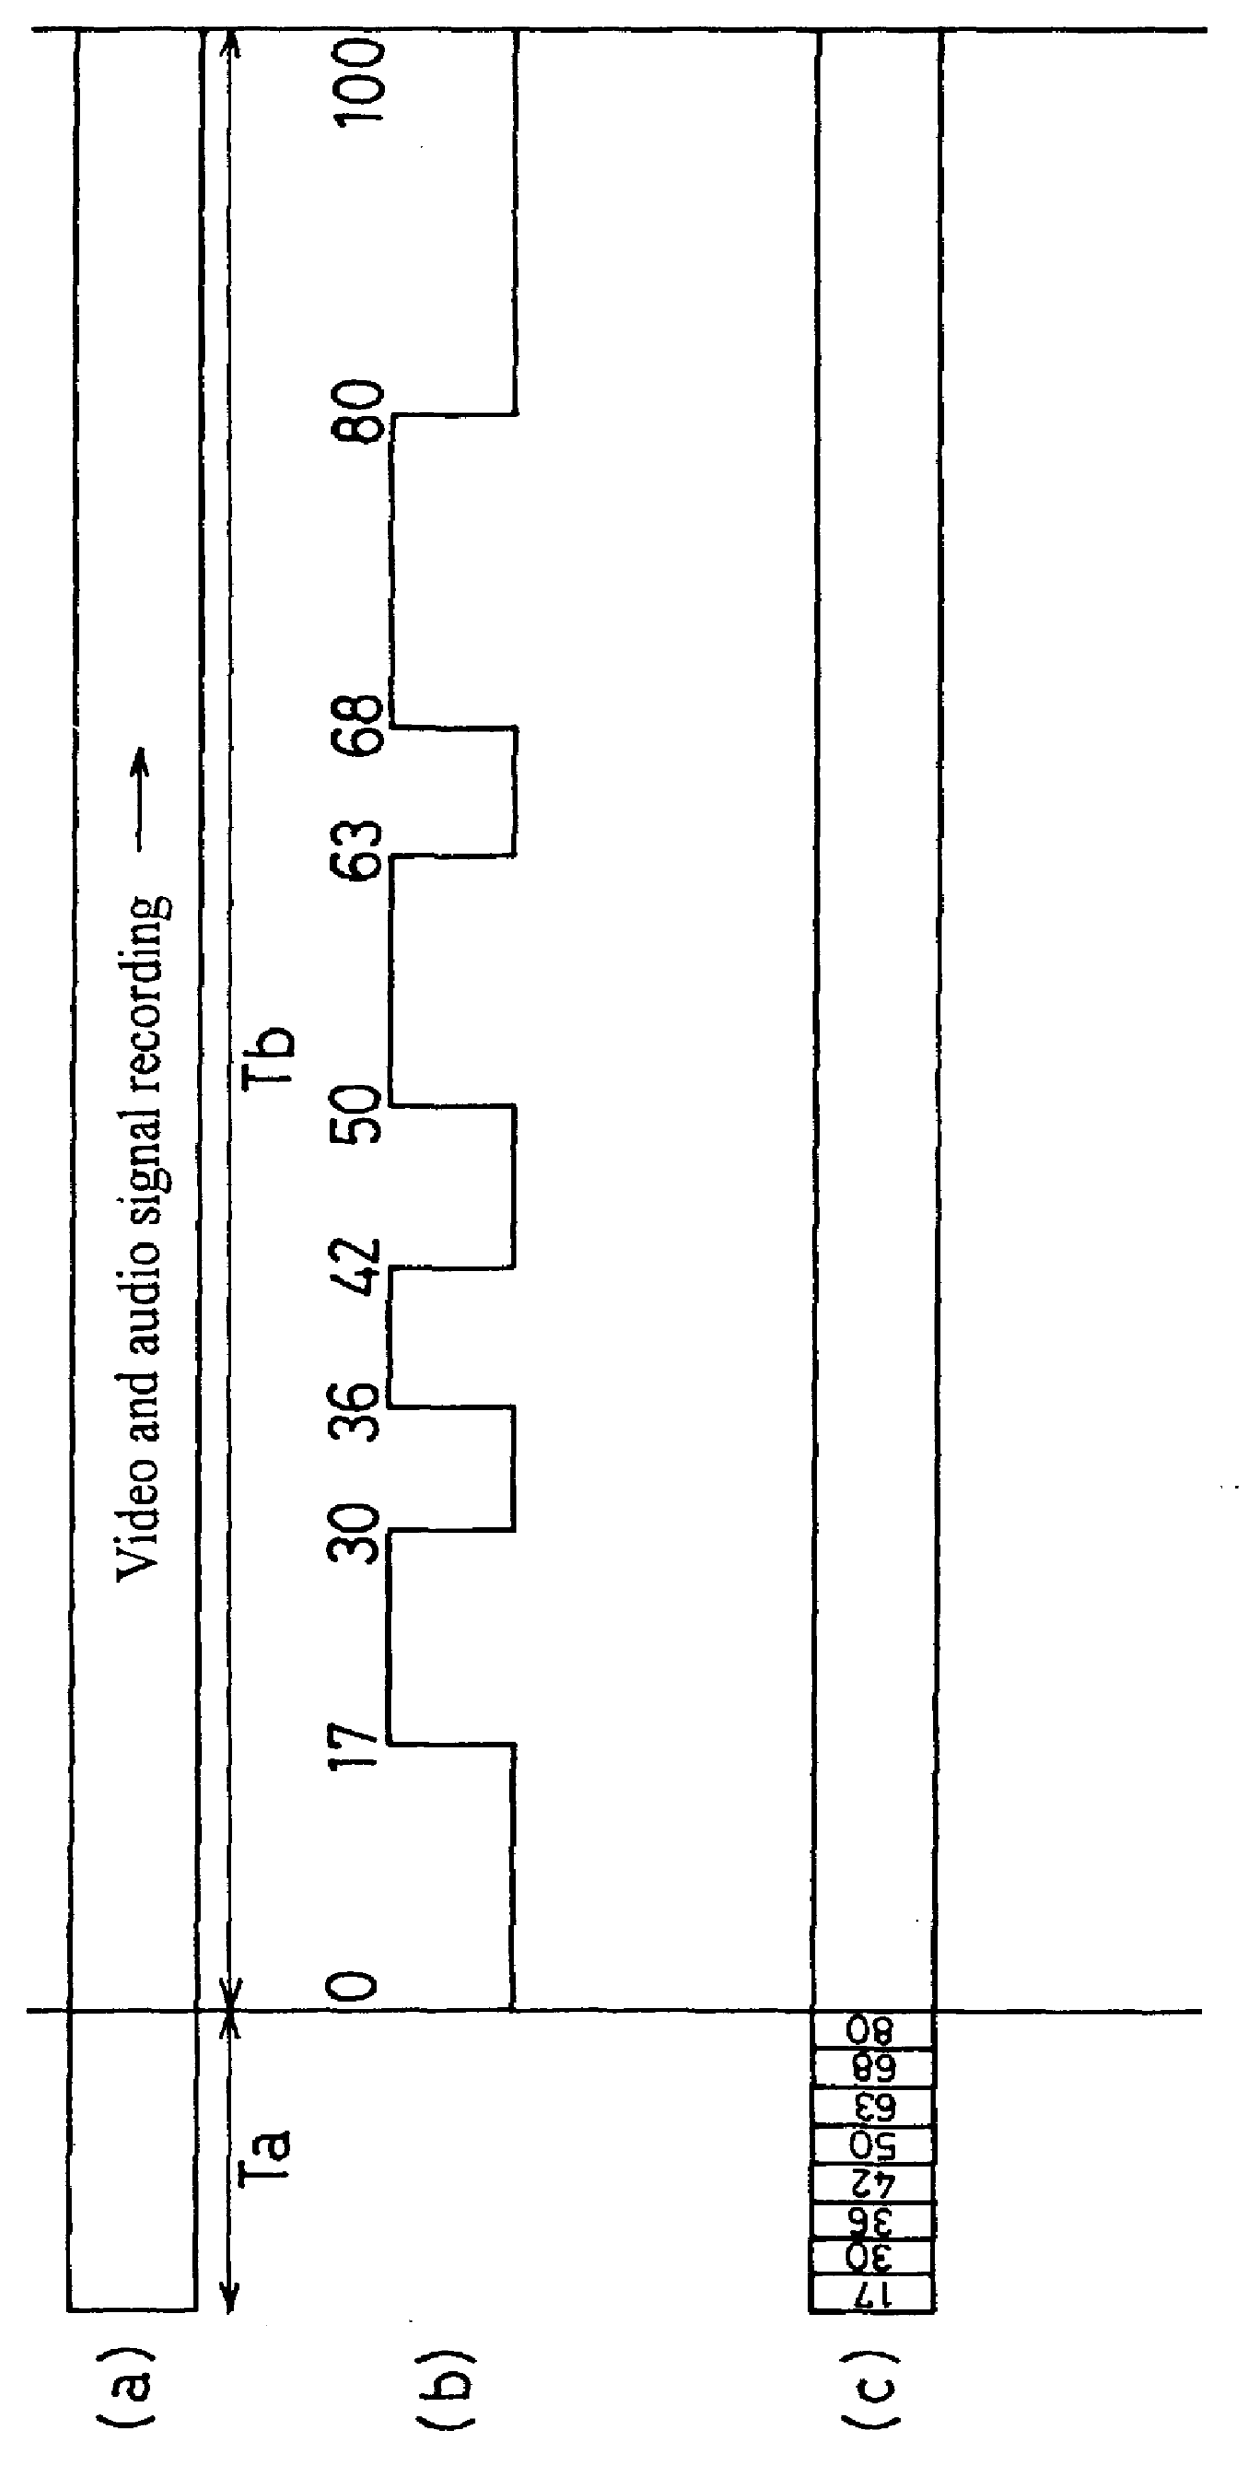 Method and apparatus for automatically generating a digest of a program